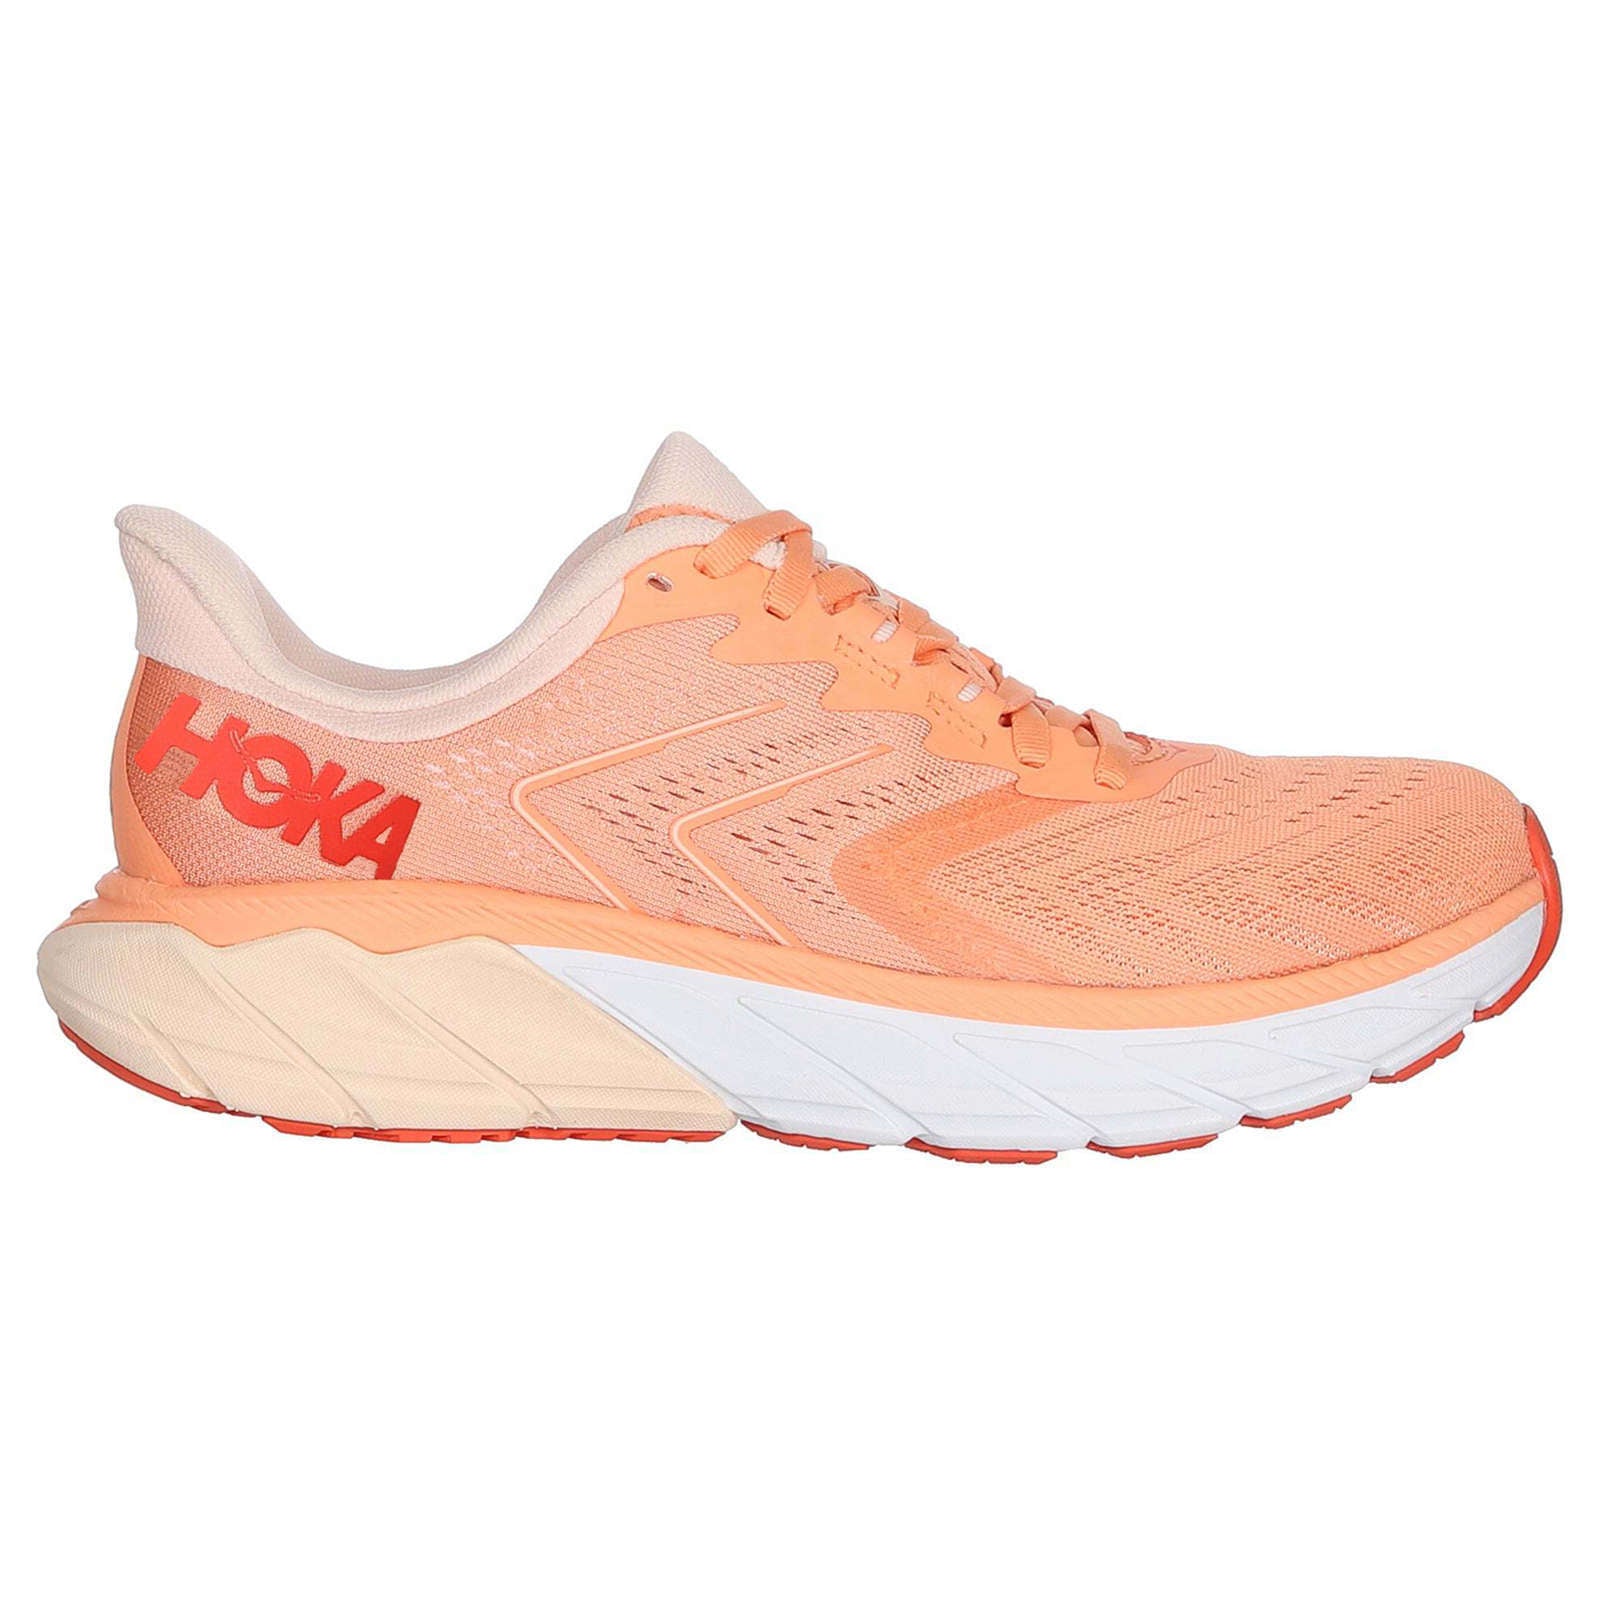 Hoka One One Arahi 5 Synthetic Textile Women's Low-Top Road Running Trainers#color_cantaloupe silver peony